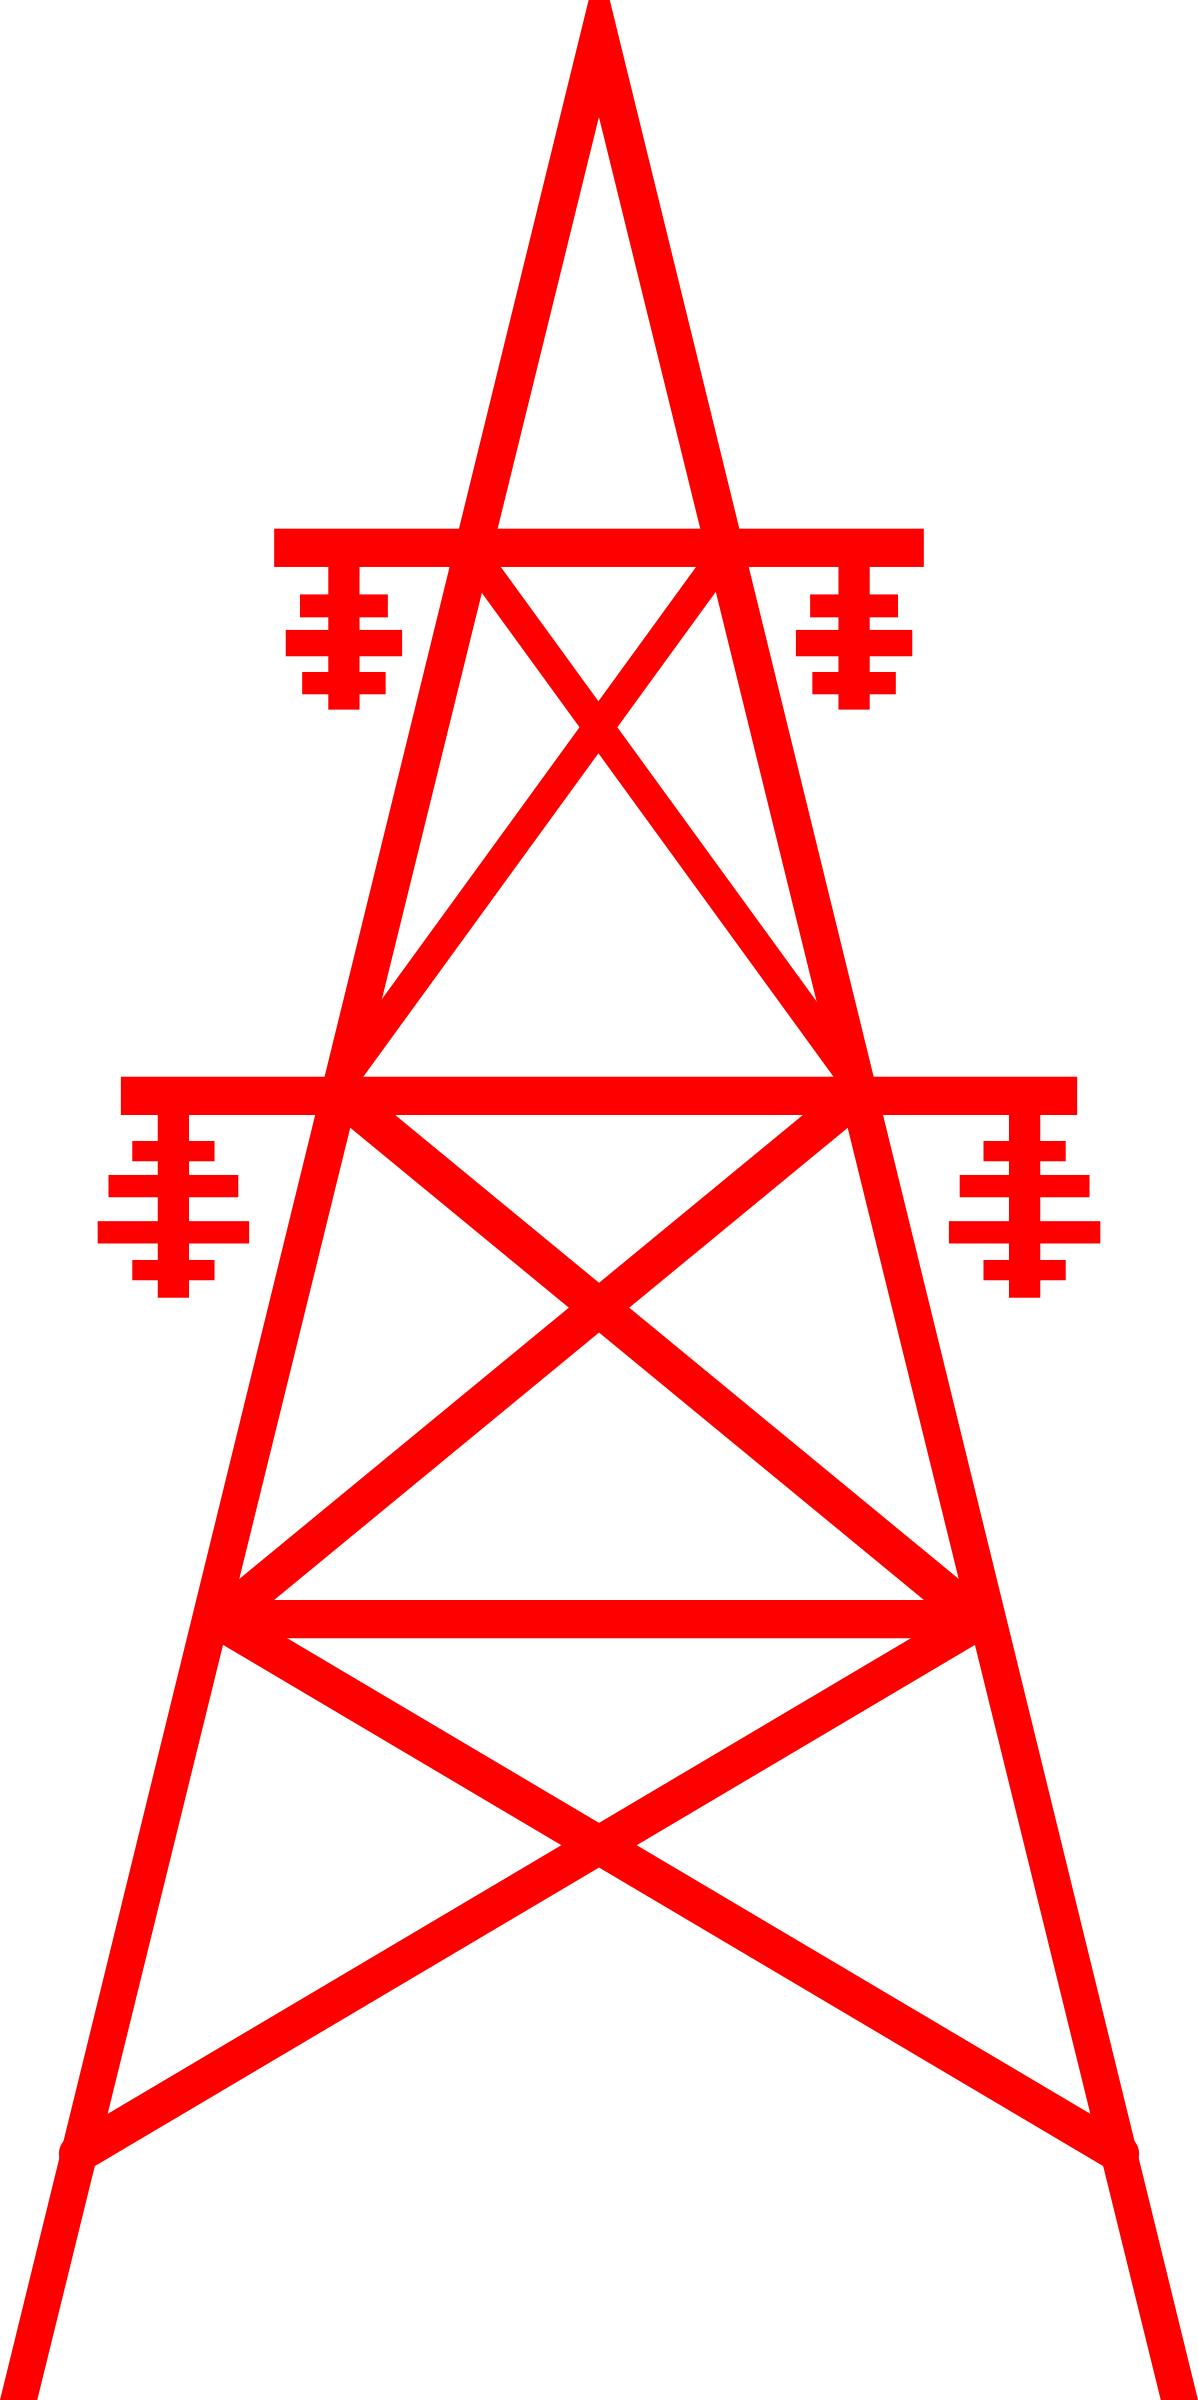 Transmission tower 1 png